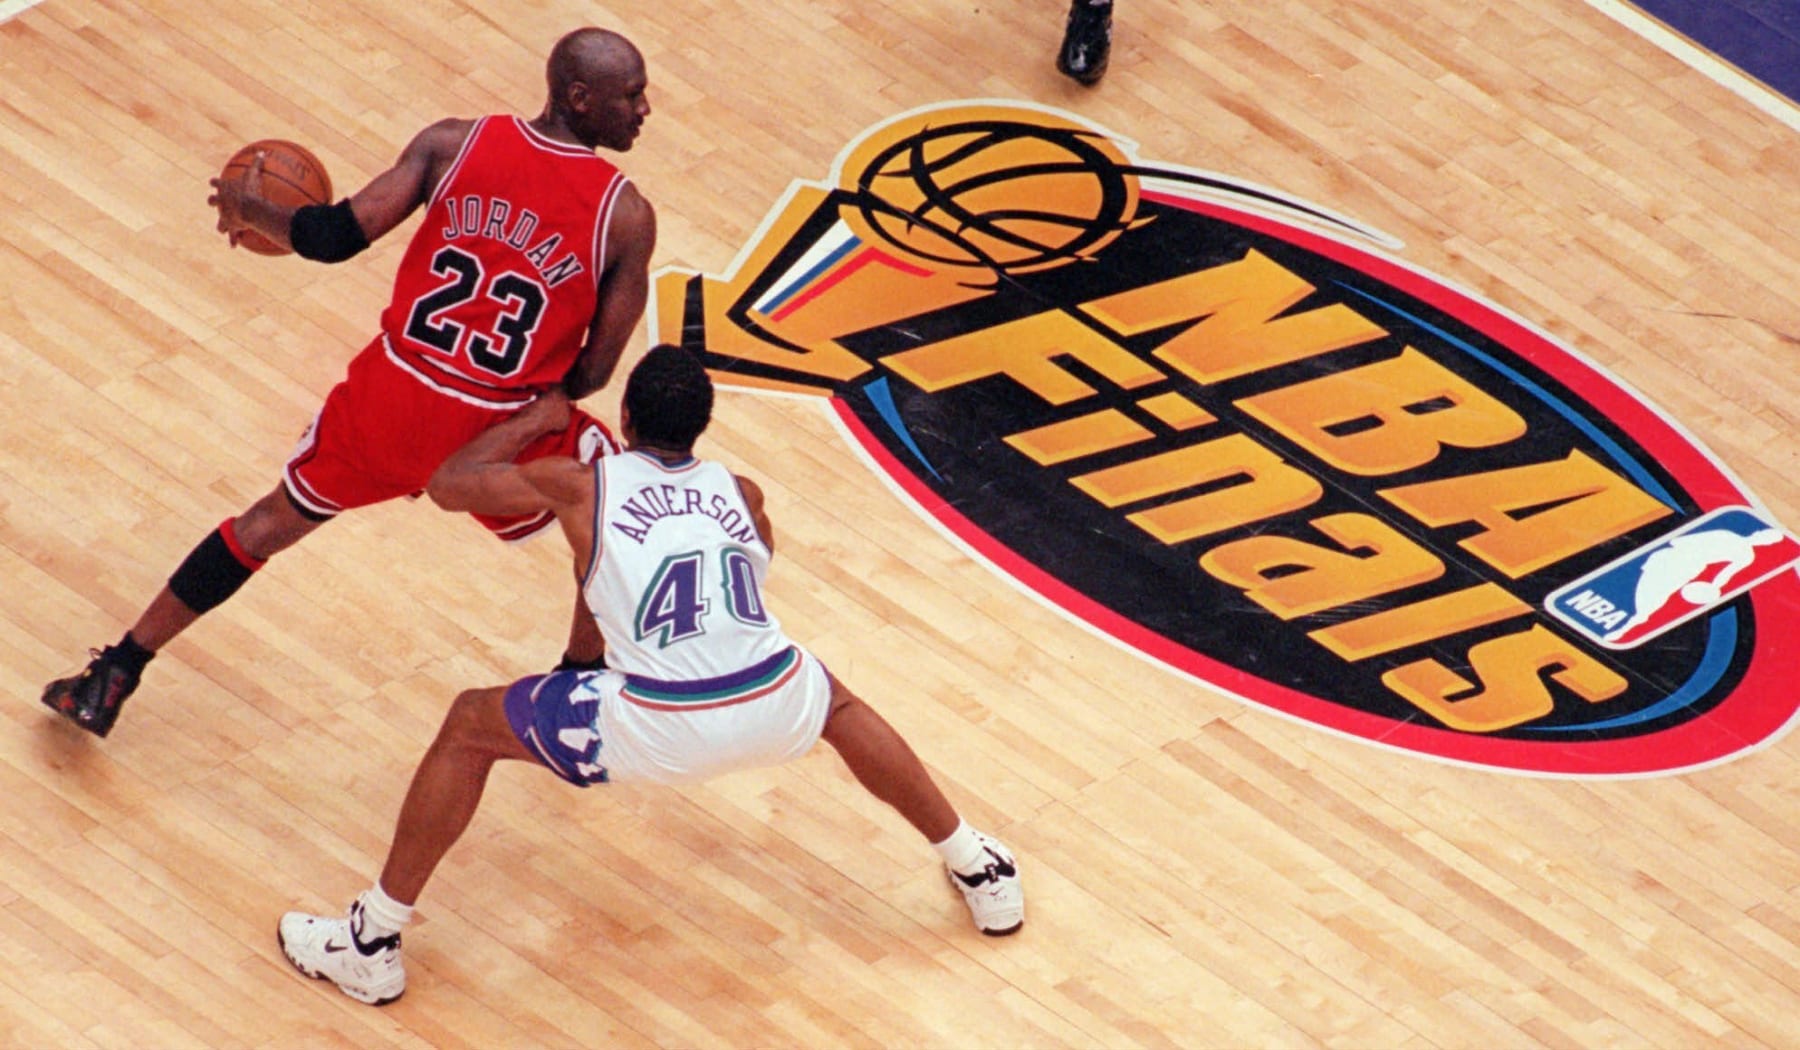 Sotheby's to Auction Michael Jordan's 1998 NBA Finals Game 2 Air